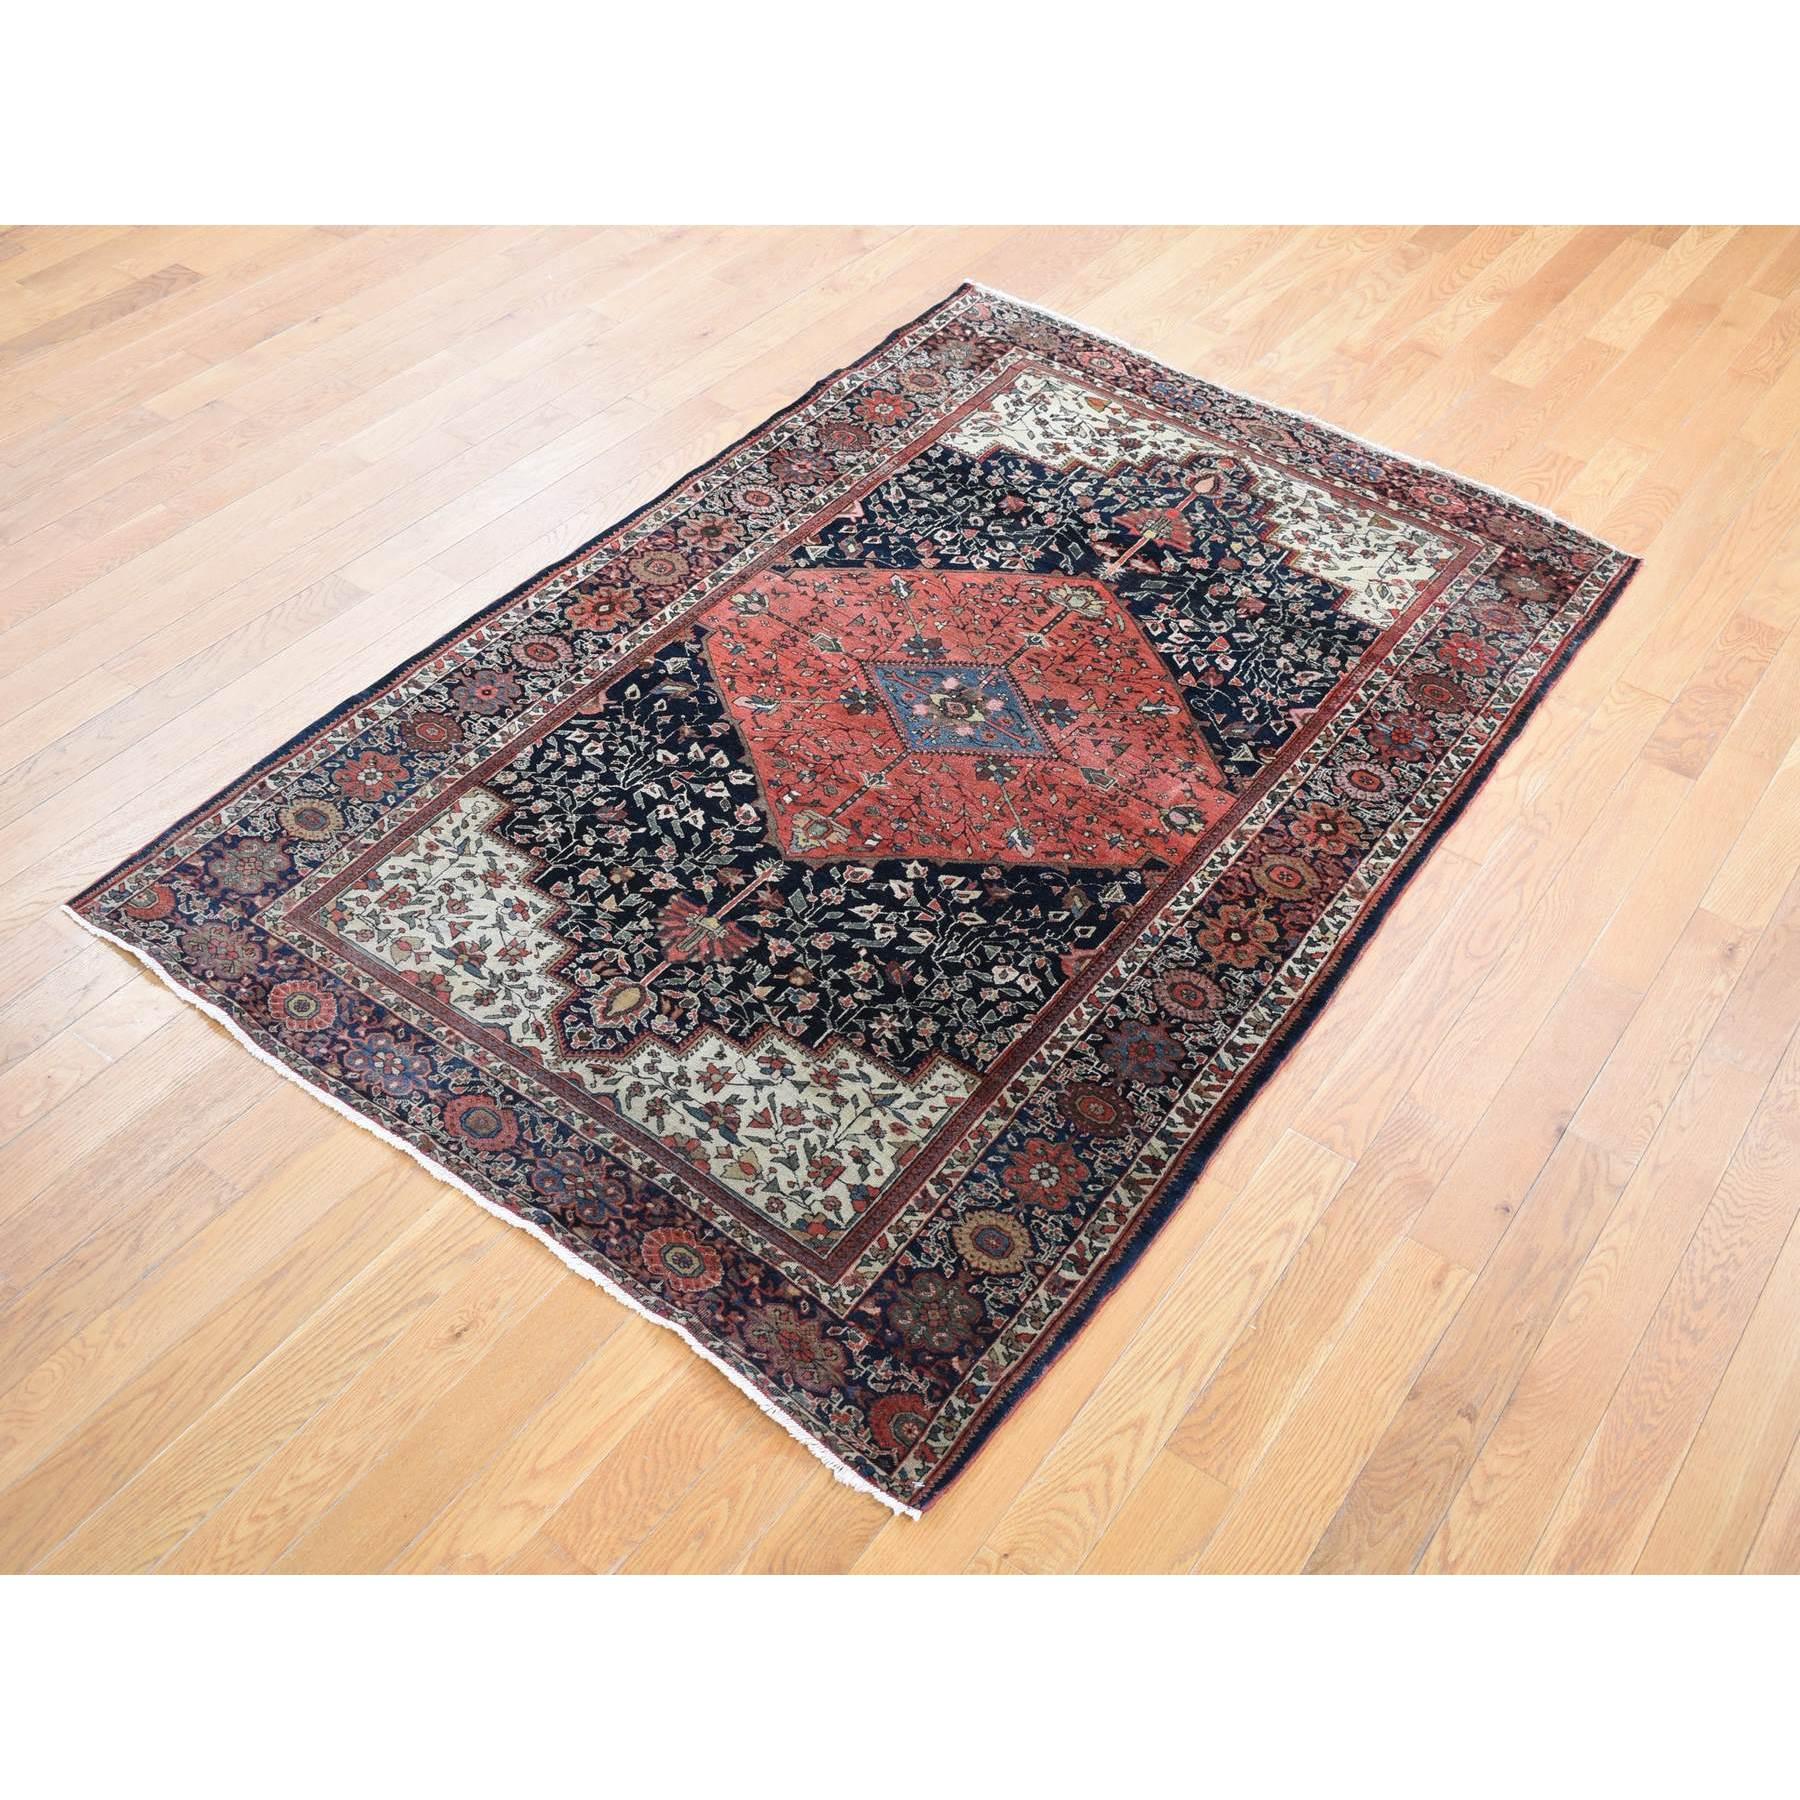 This fabulous Hand-Knotted carpet has been created and designed for extra strength and durability. This rug has been handcrafted for weeks in the traditional method that is used to make
Exact Rug Size in Feet and Inches : 4'2